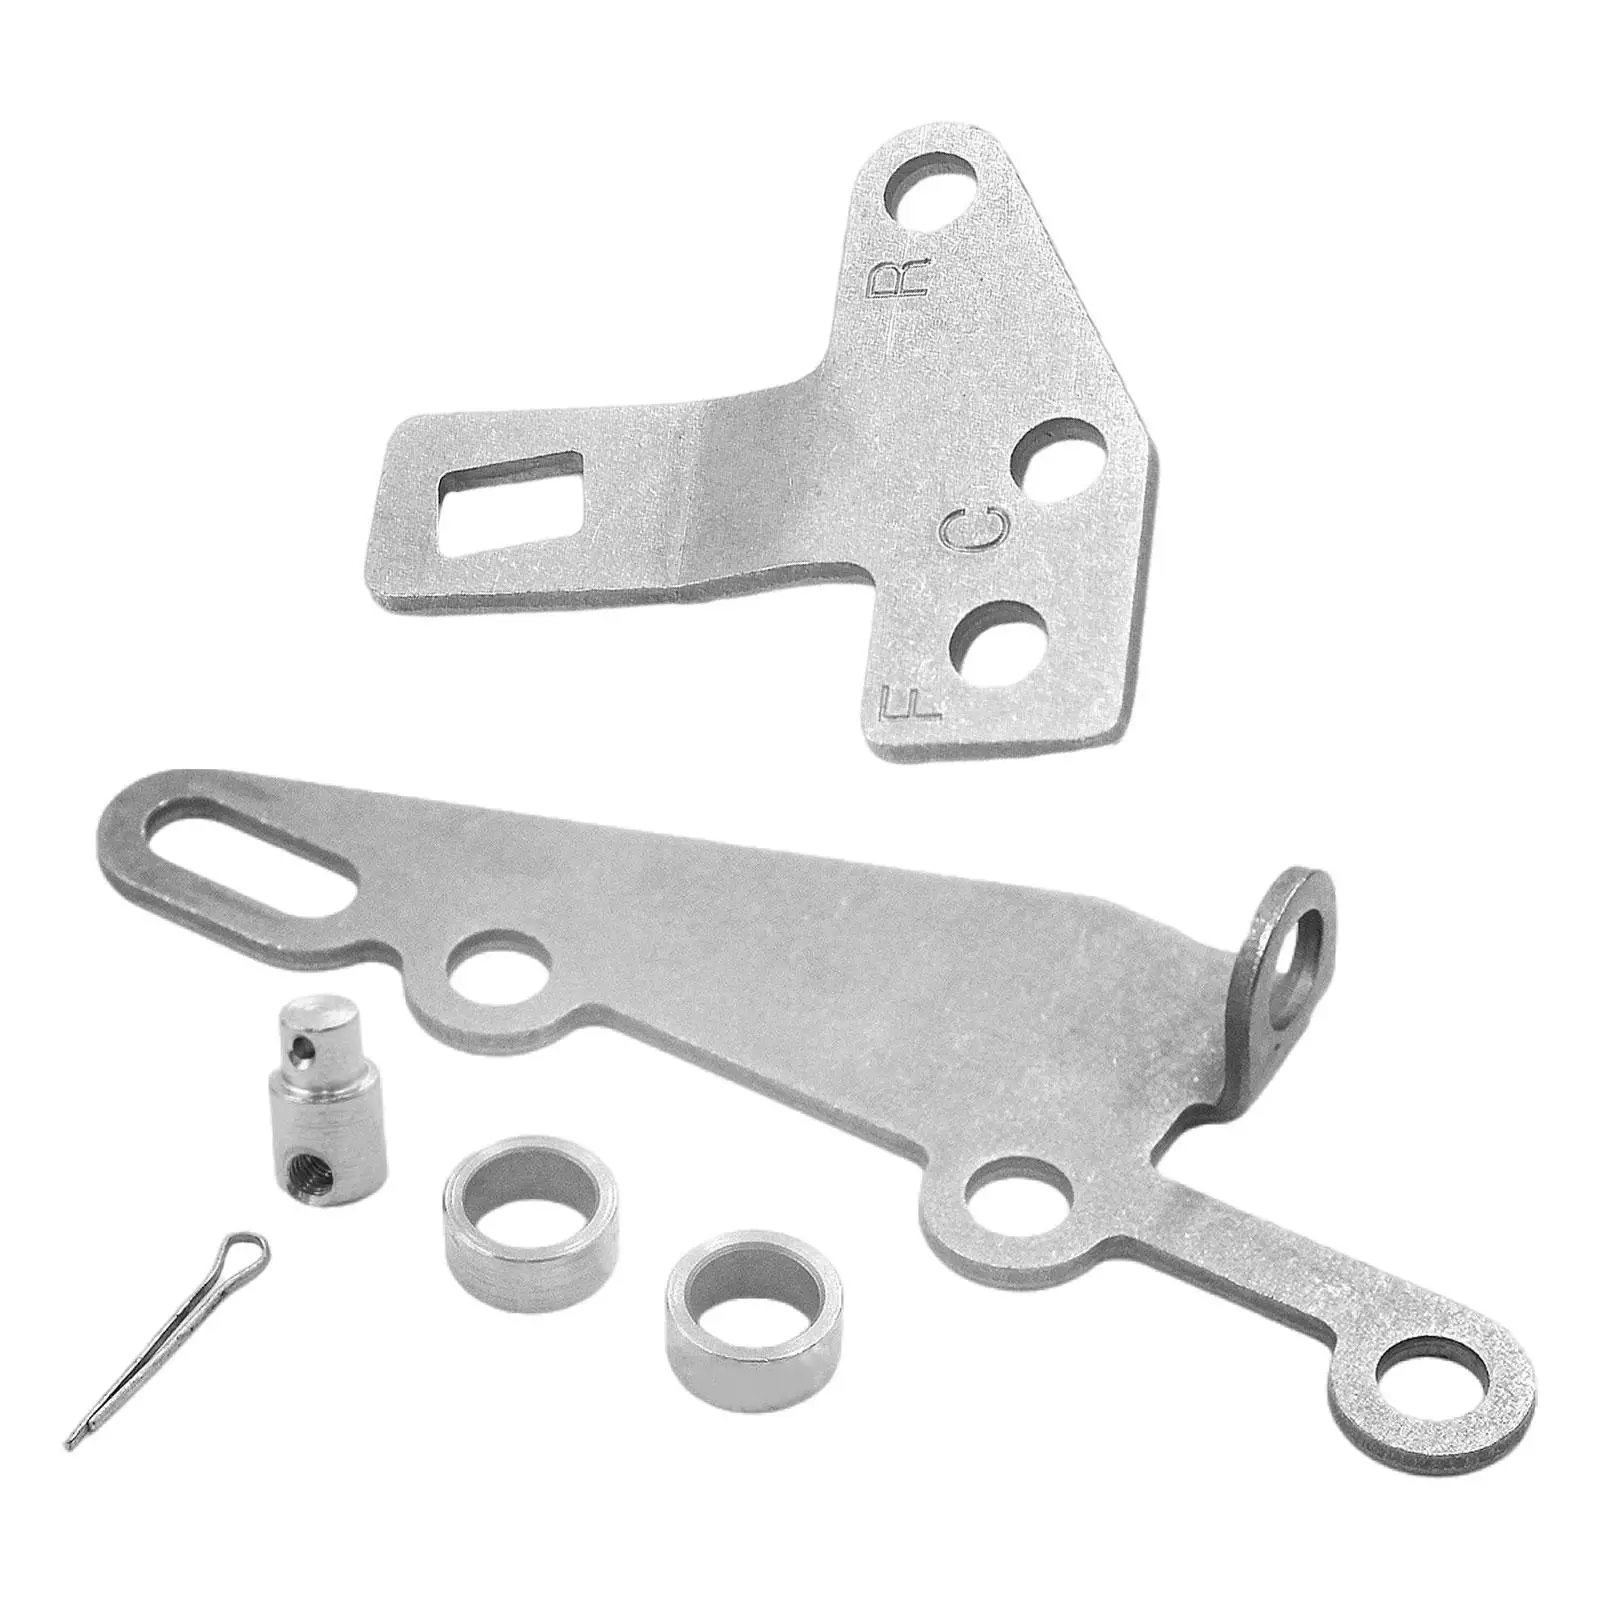 Shifter Bracket Kit 35498 Repair Parts for TH400 TH350 H250/200 TH700-r4 4L60 Easy Installation